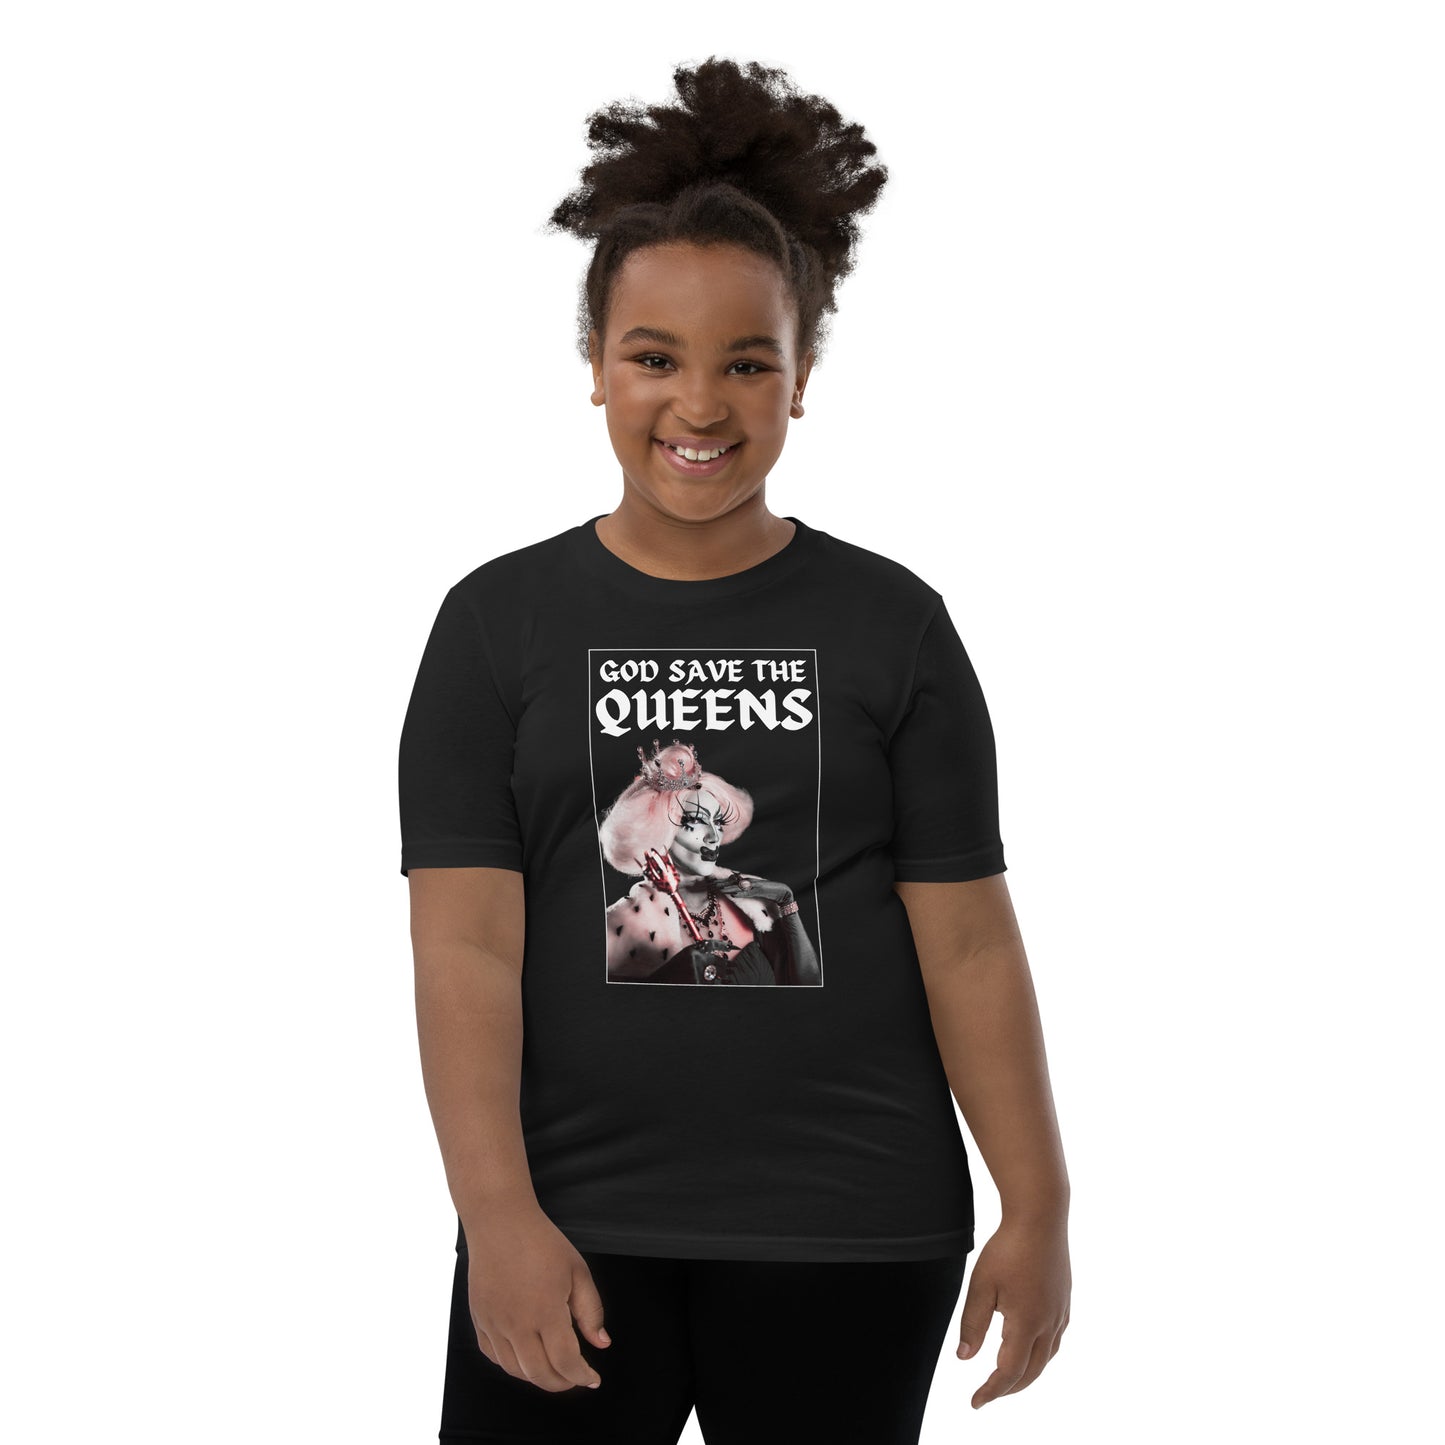 God Save the Queens Youth Tee - Dark Colors